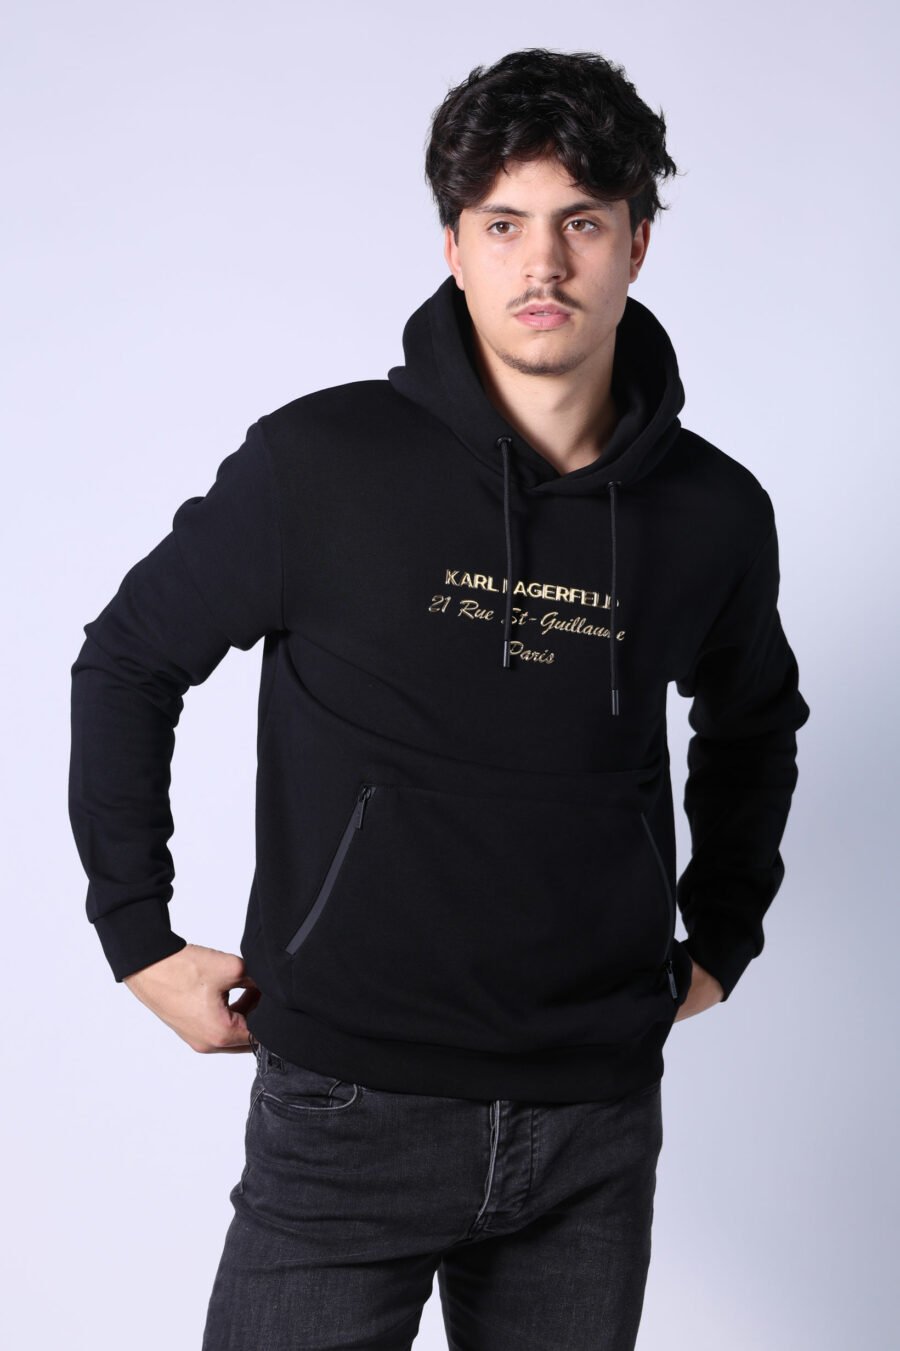 Black hooded sweatshirt with gold lettering "rue st guillaume" logo - Untitled Catalog 05728